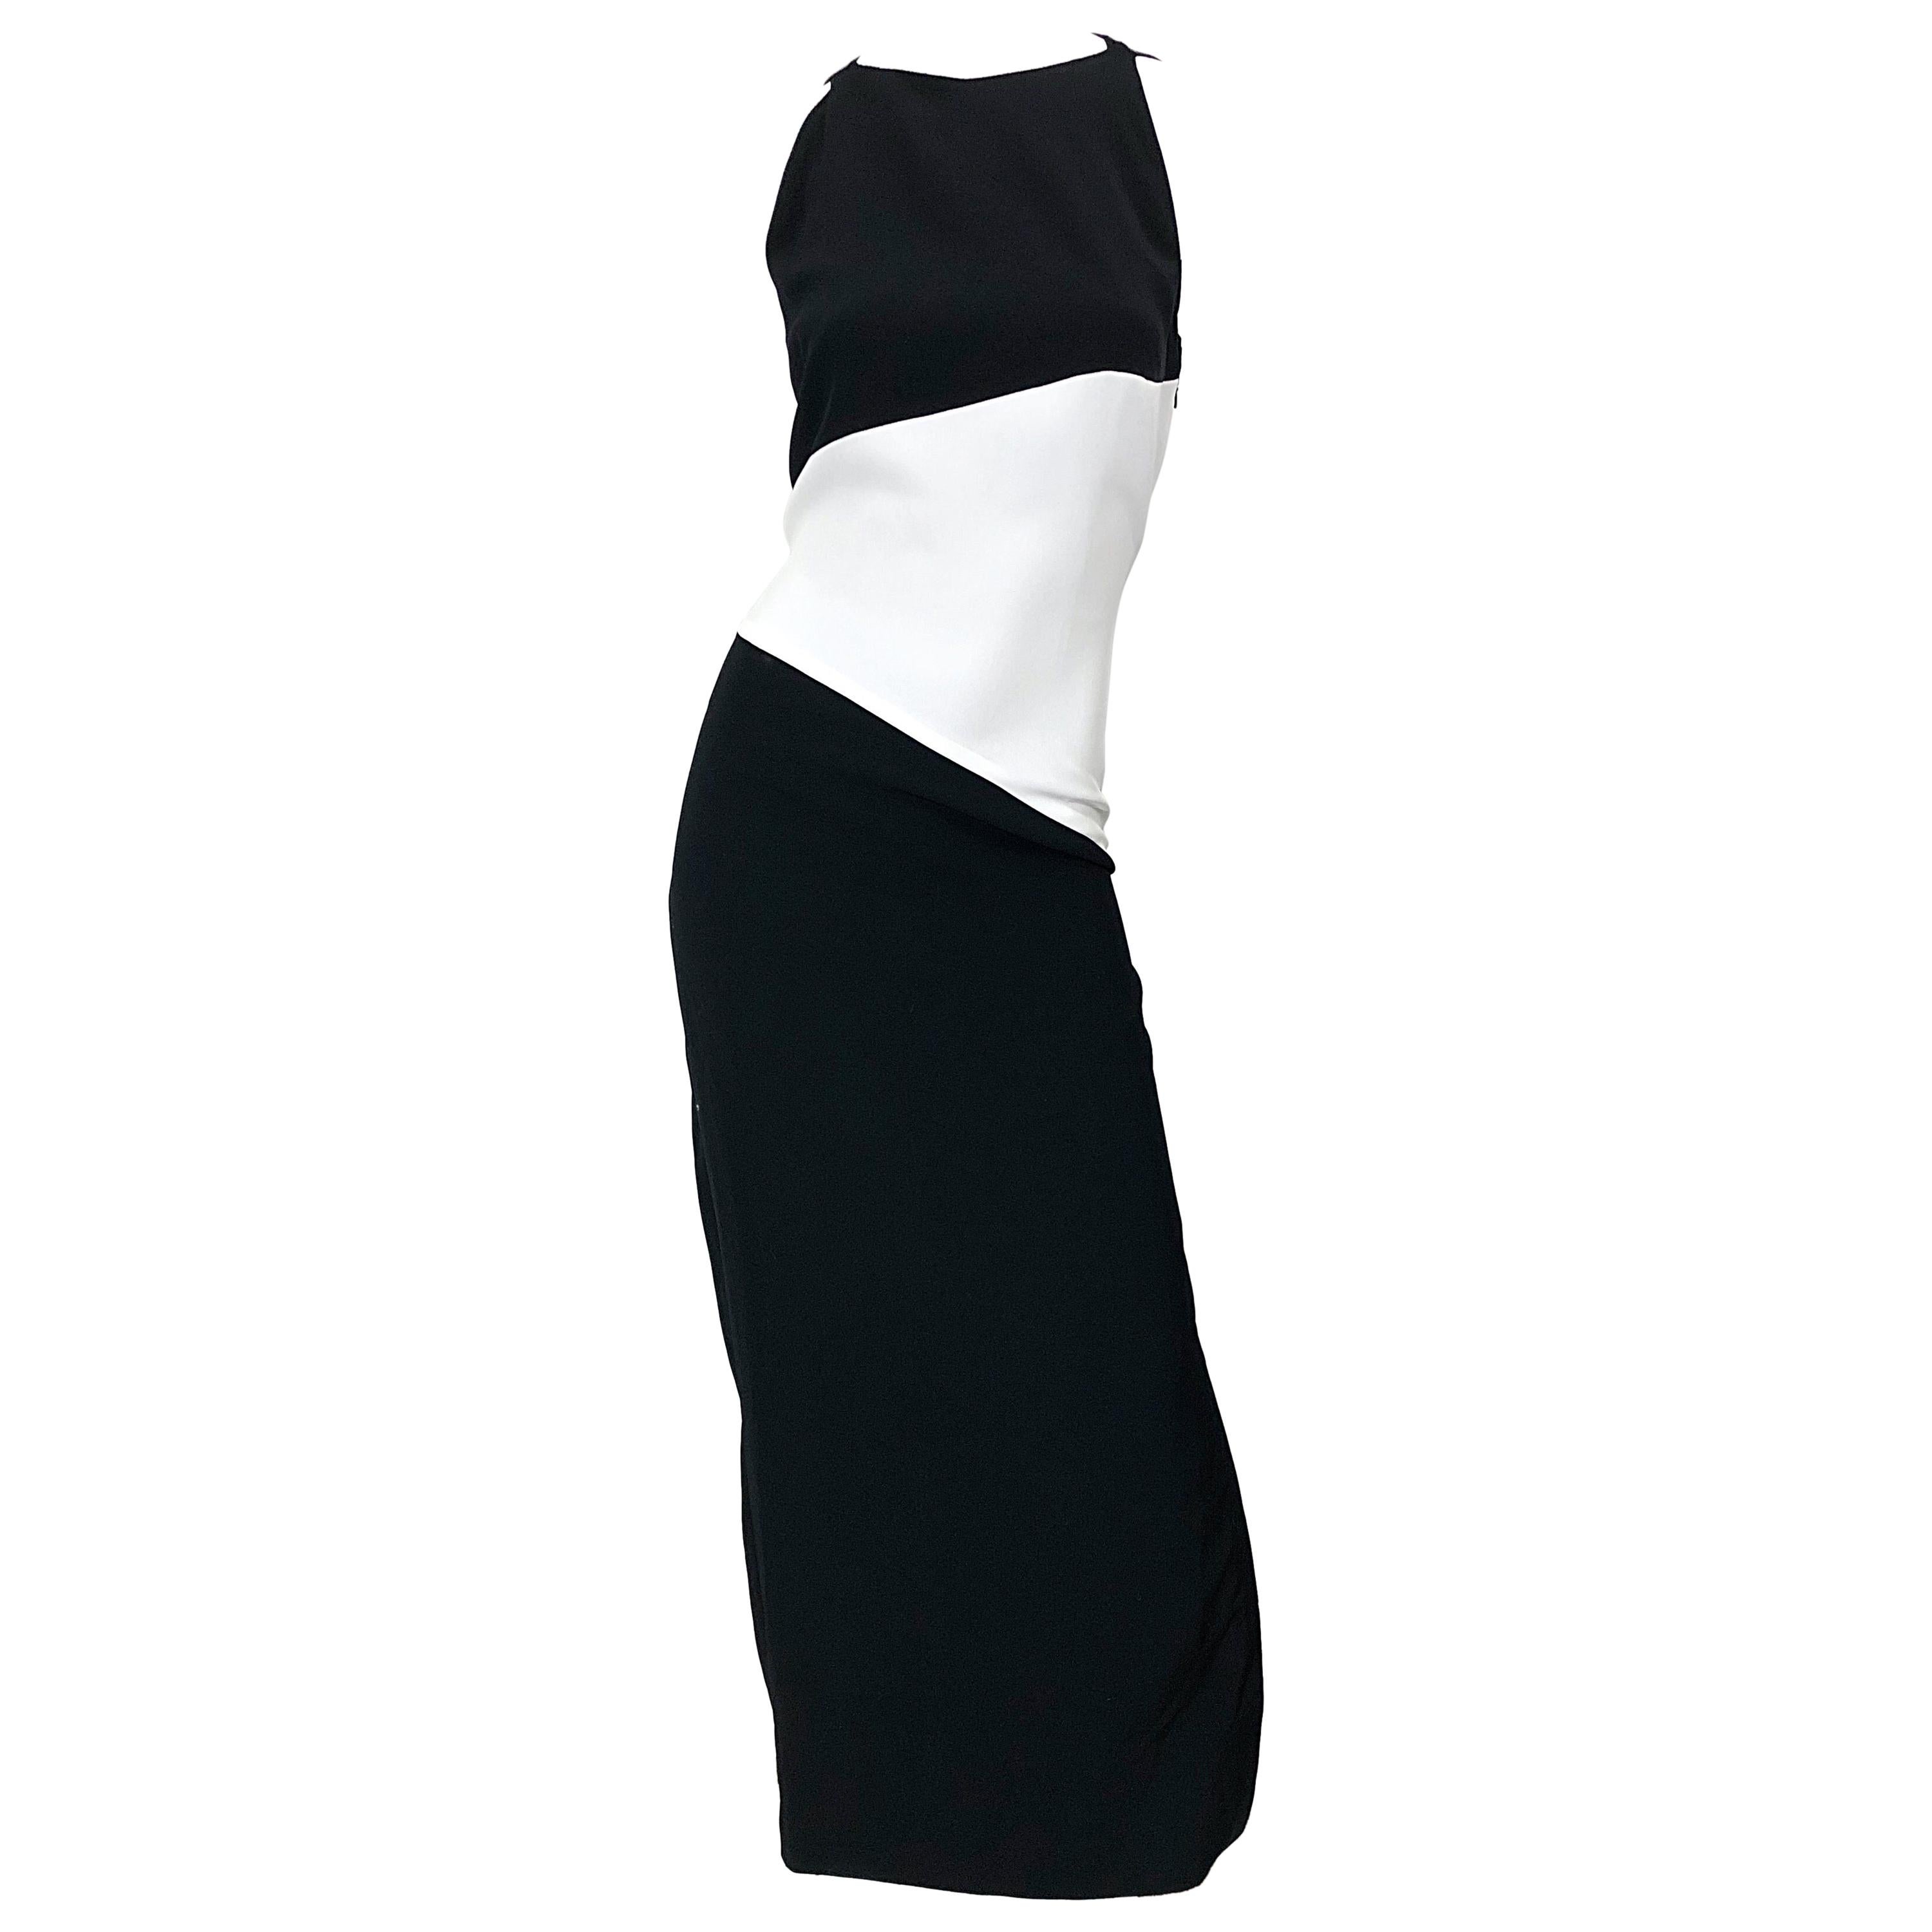 NWT Vintage Bob Mackie Size 8 Black and White Color Block Sleeveless Gown Dress For Sale